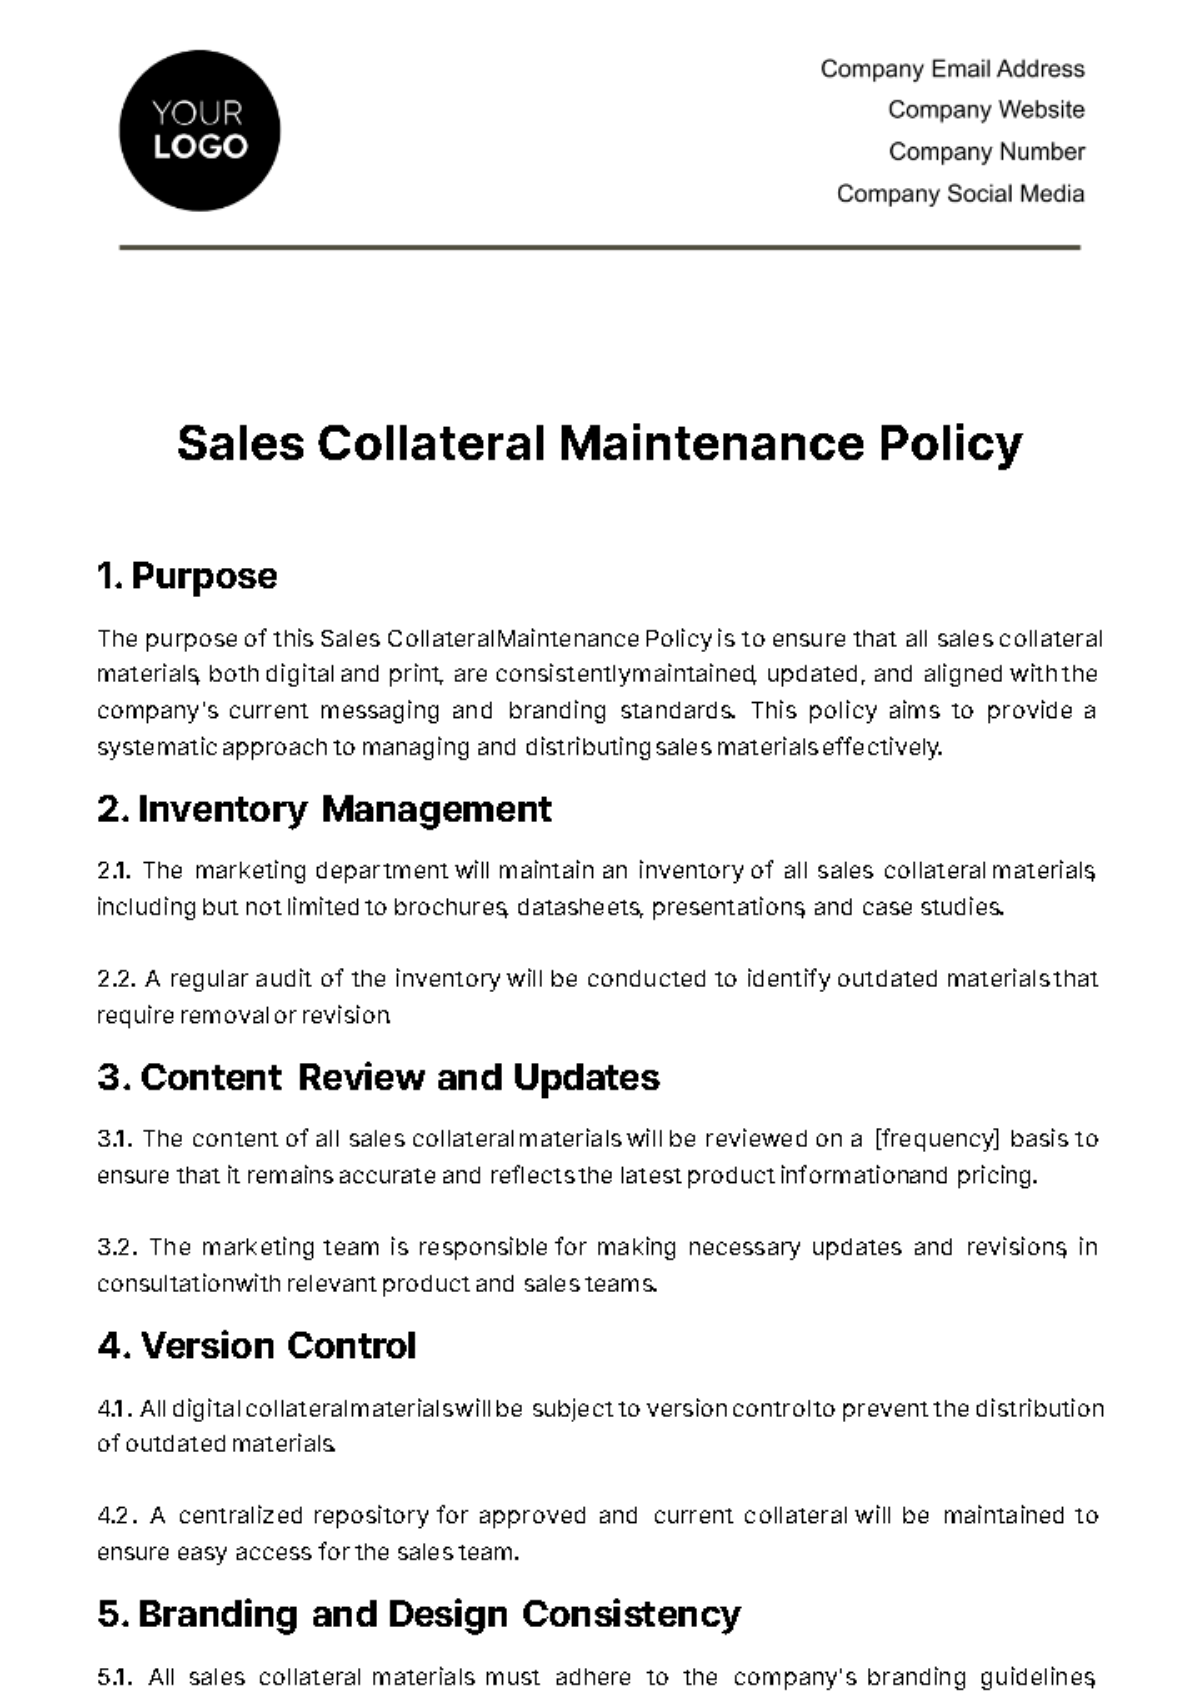 Sales Collateral Maintenance Policy Template